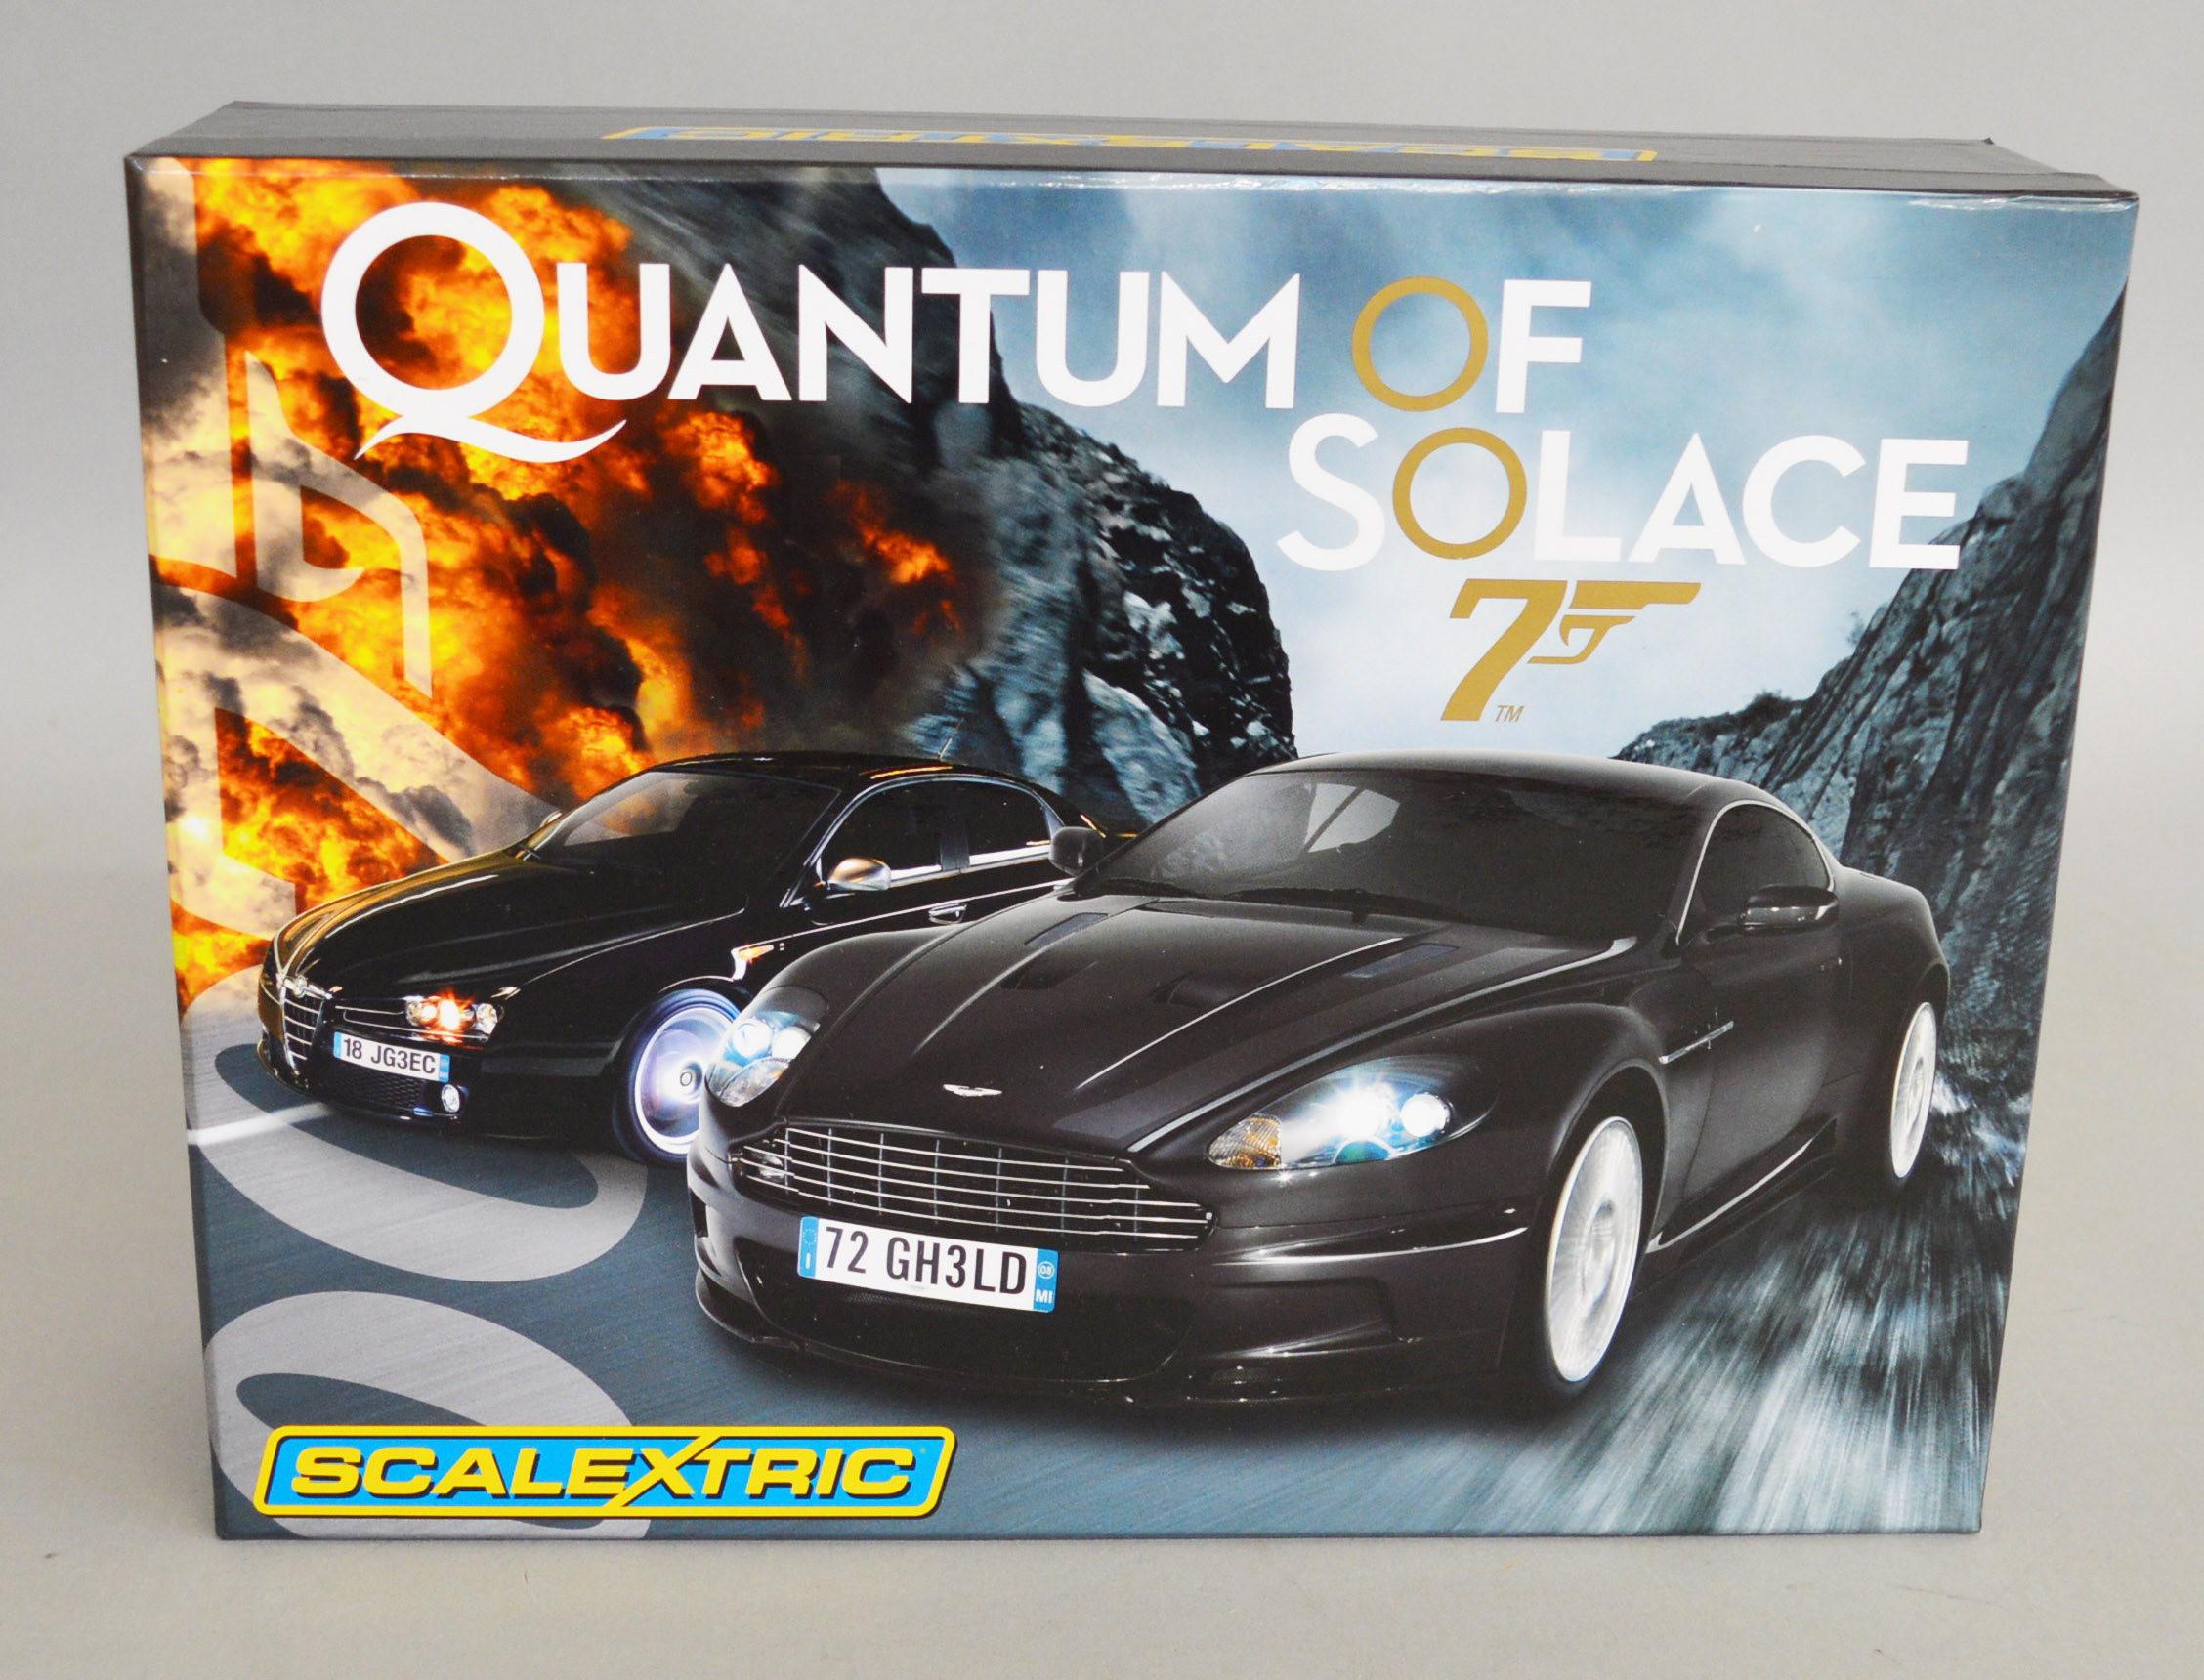 James Bond 007. A boxed  Scalextric C2922A Quantum Of Solace set containing two cars, an Aston